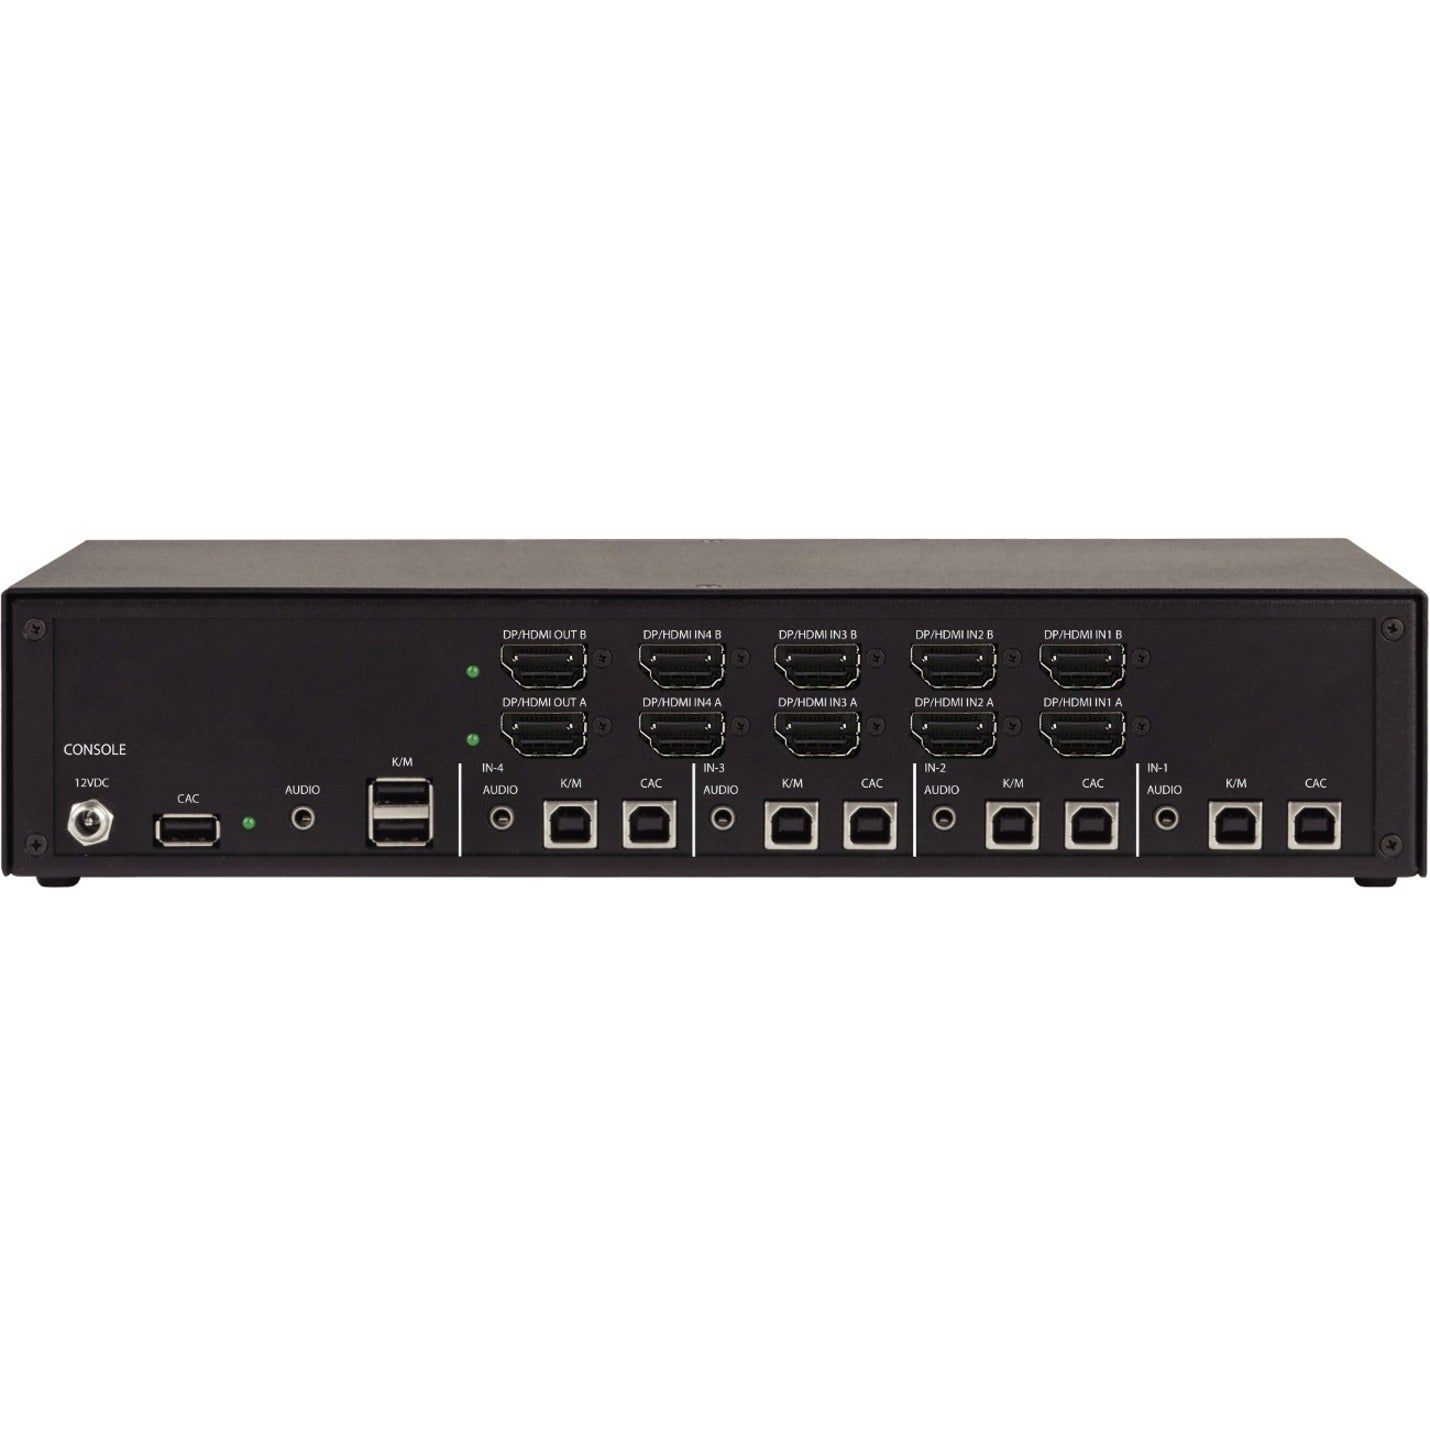 Black Box KVS4-2004HVX Secure KVM Switch - FlexPort HDMI/DisplayPort, 4 Computers Supported, 2 Local Users Supported